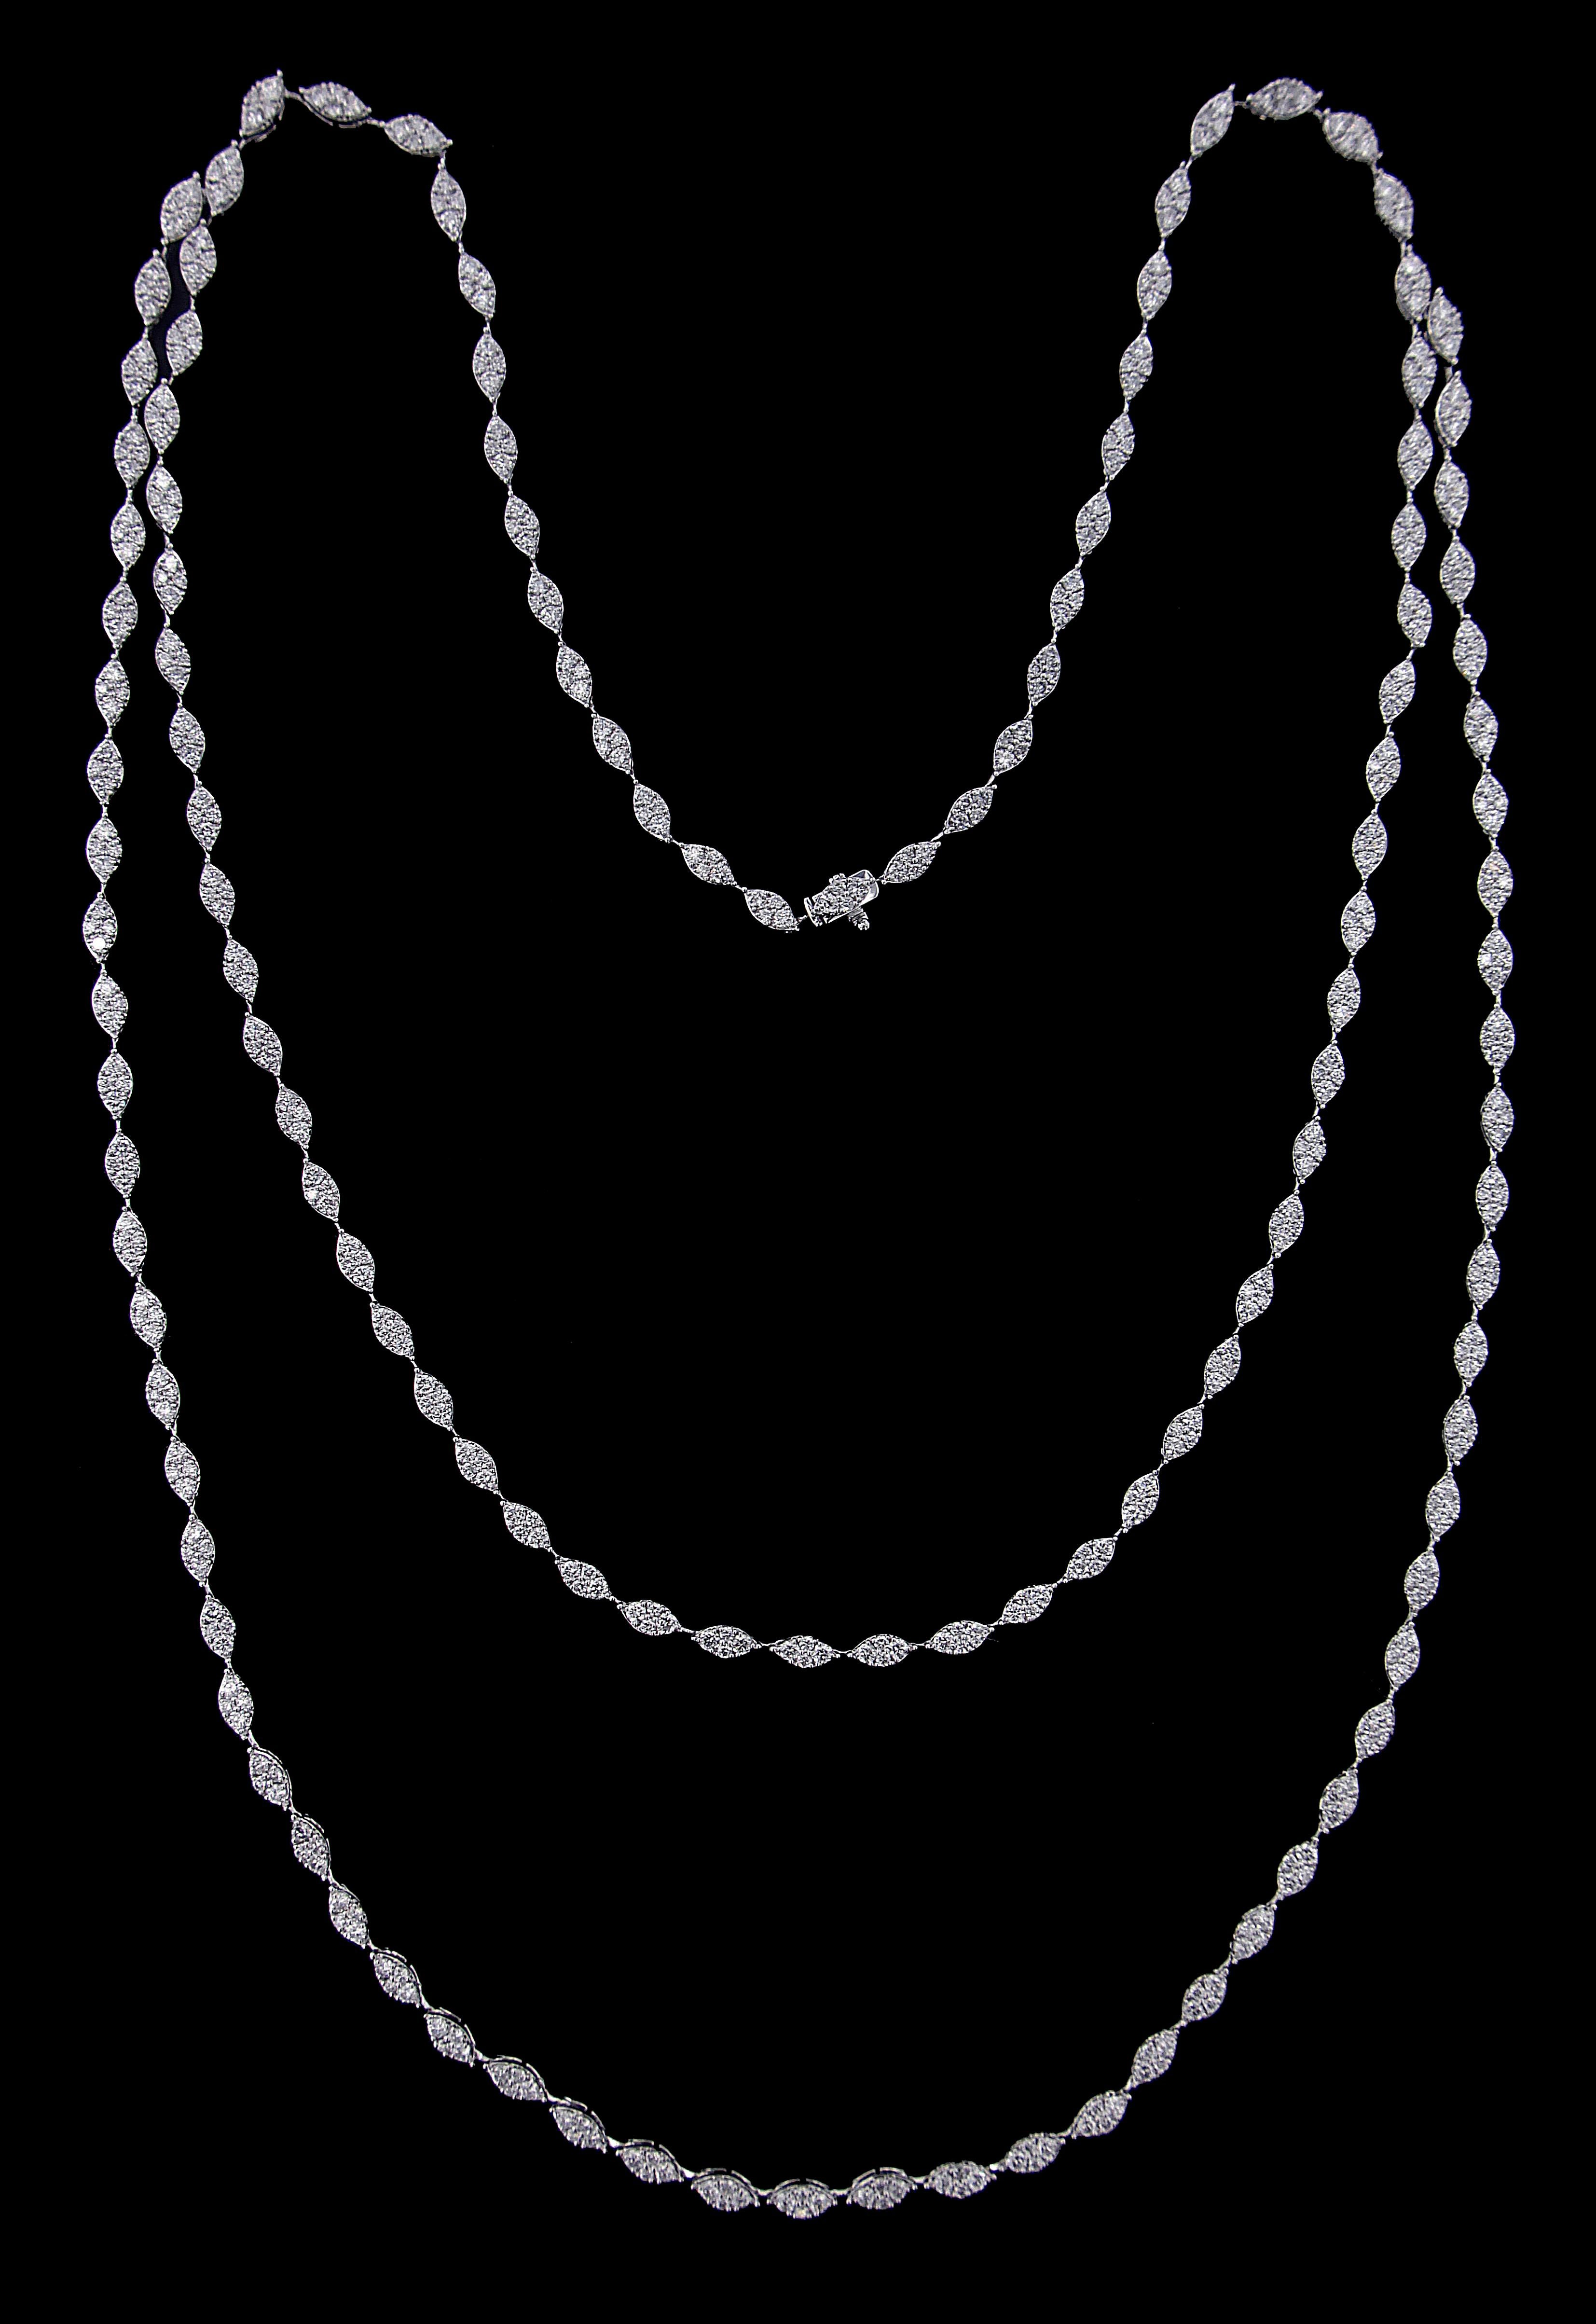 Necklace:
Diamonds of approximately 11.689 carats, mounted on 18 karat white gold necklace. The Necklace weighs approximately around 37.172 grams.
